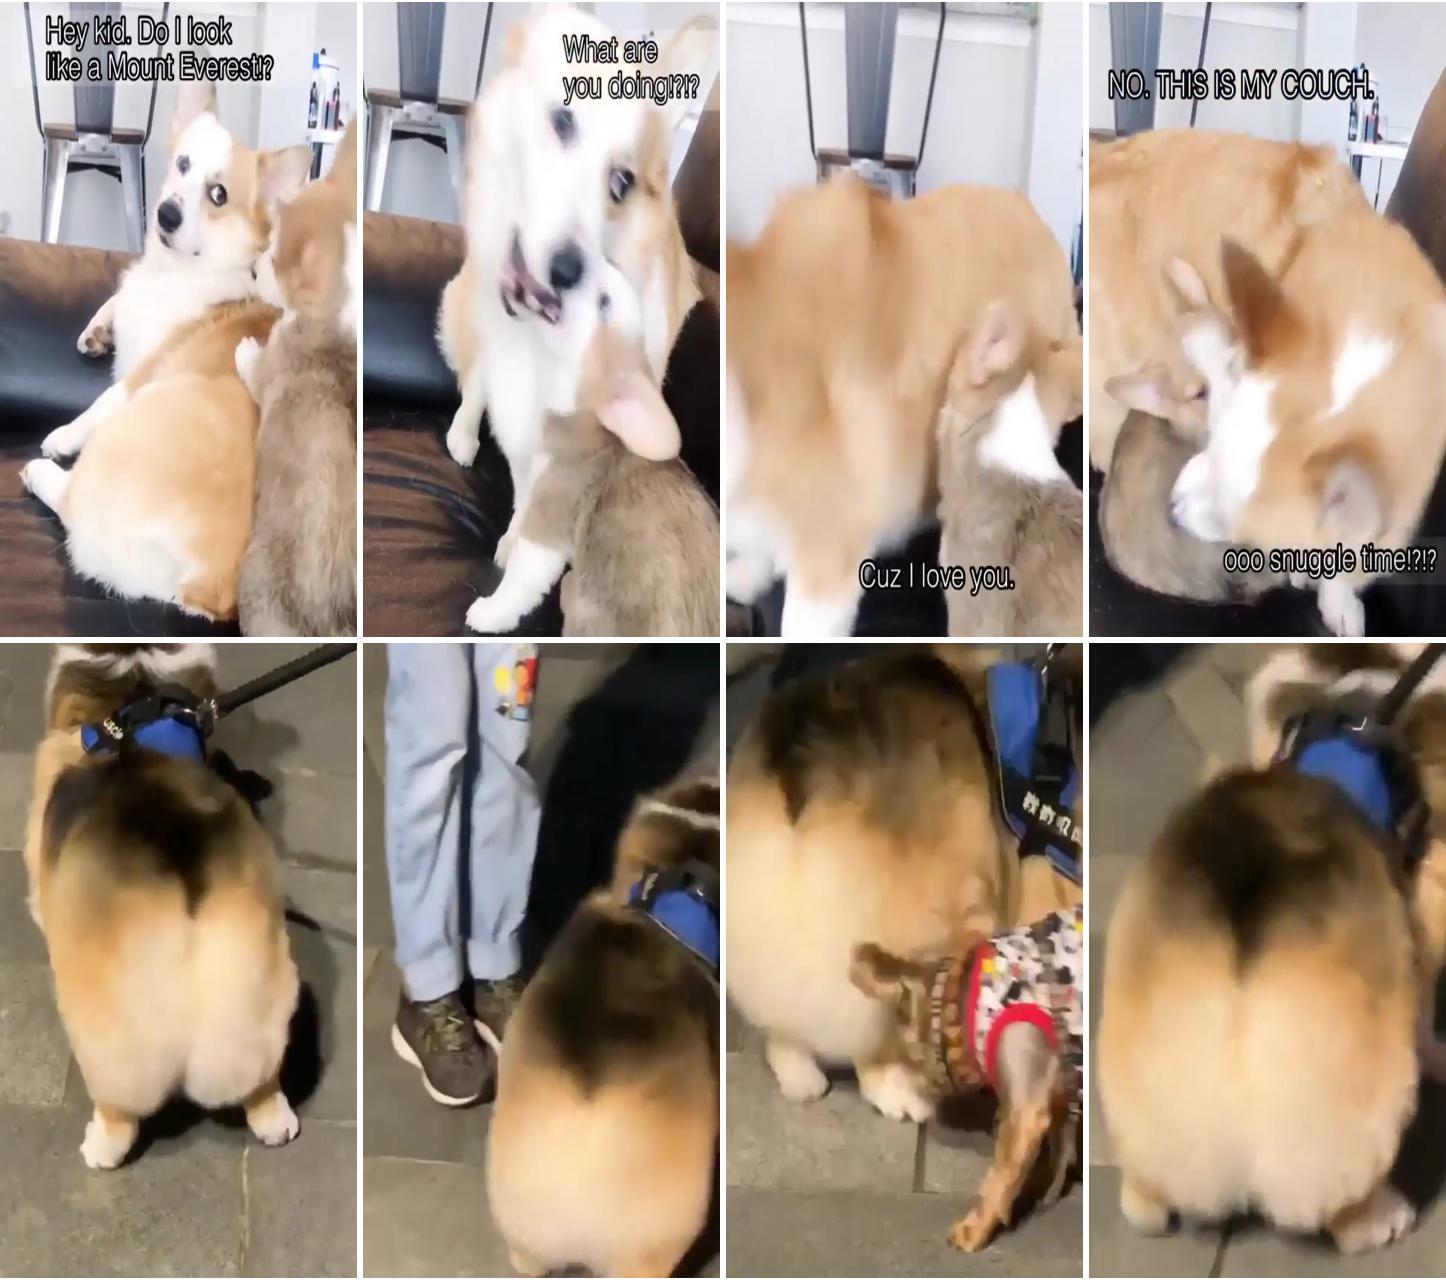 This is how my corgo welcome smol corgo; wag that fluffy butt